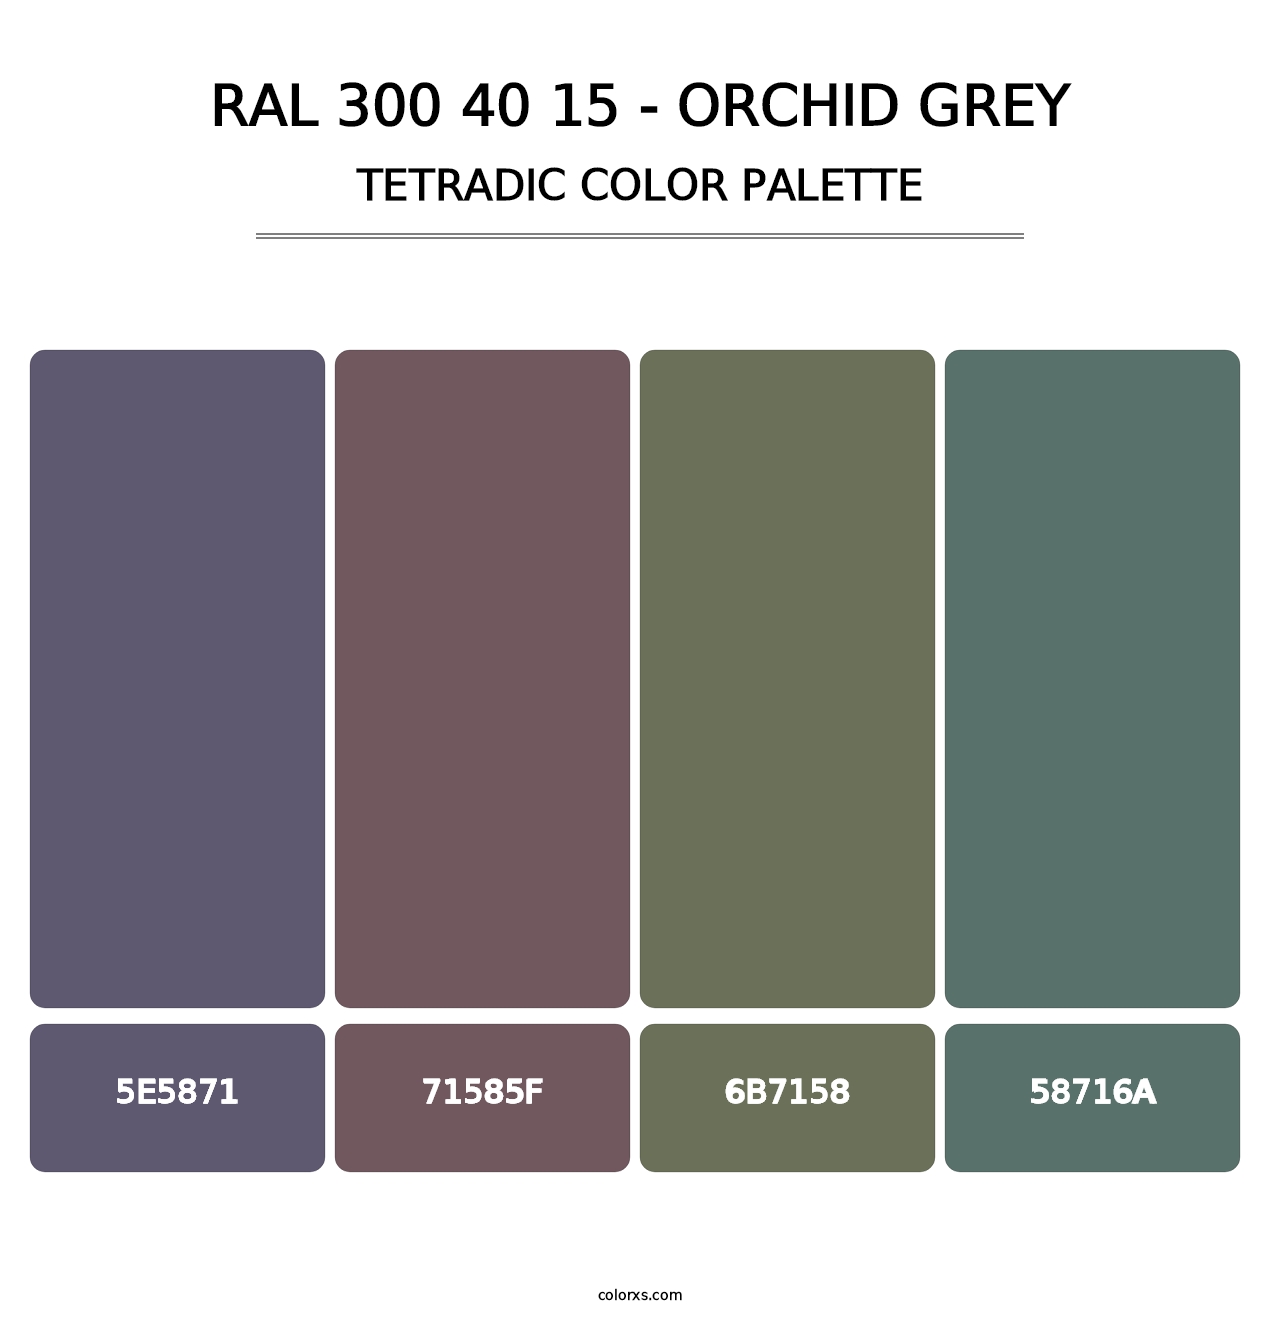 RAL 300 40 15 - Orchid Grey - Tetradic Color Palette